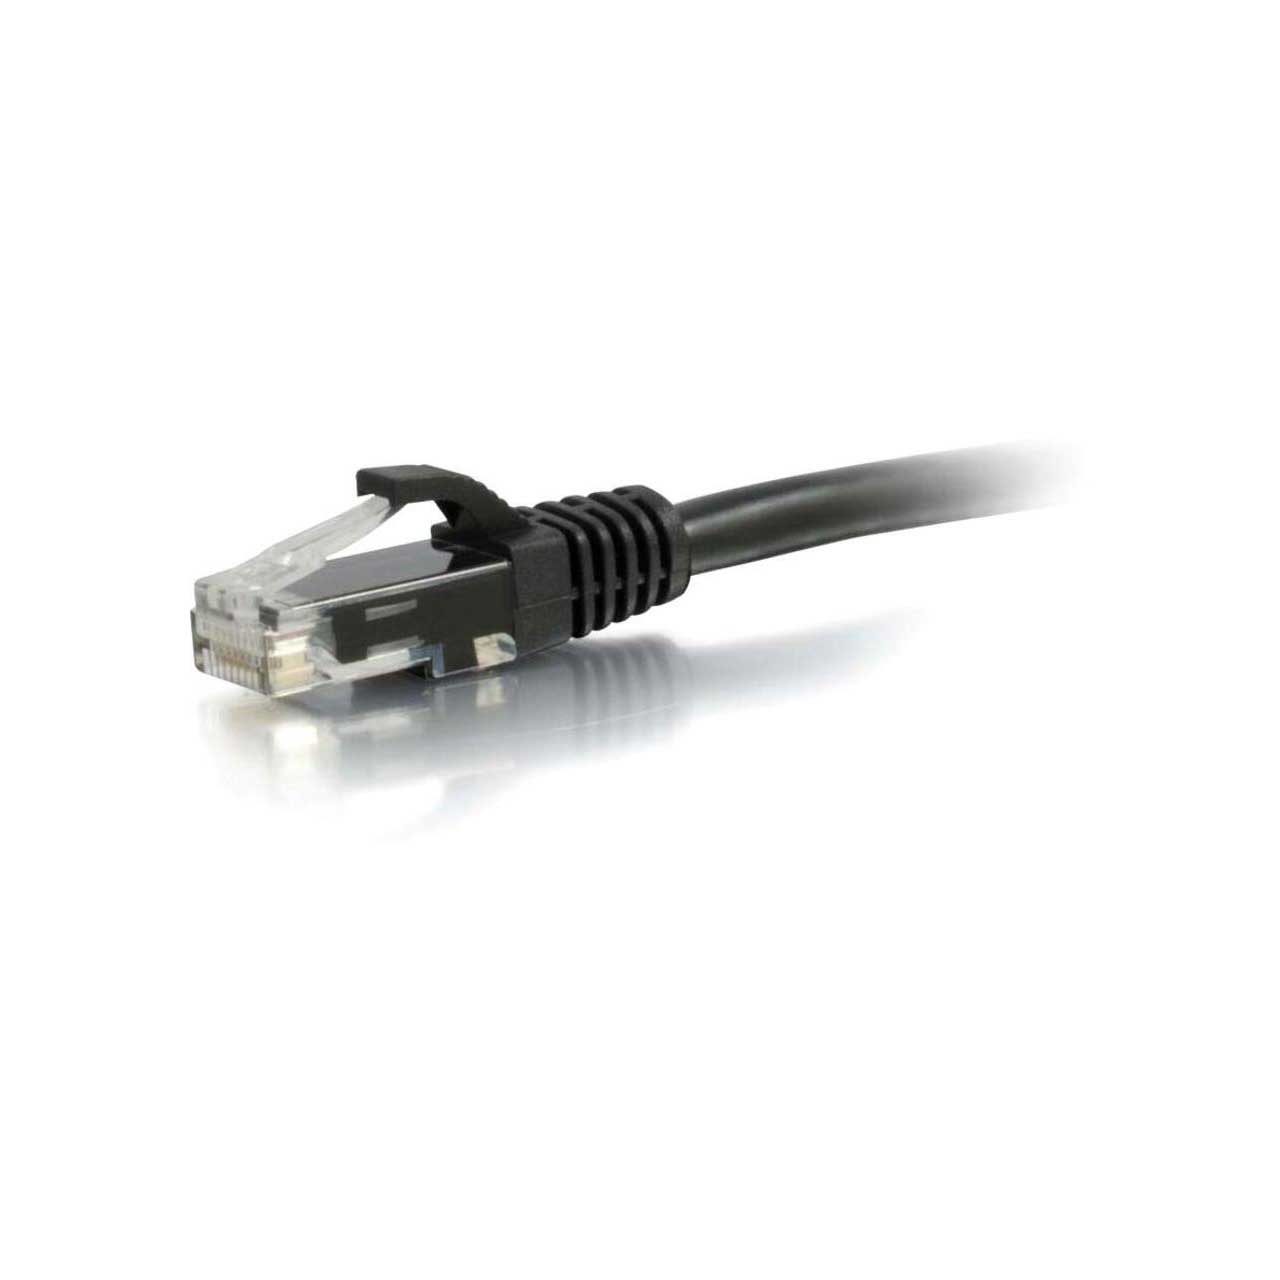 C2G 03985 Cat6 Snagless Unshielded (UTP) Ethernet Patch Cable - Black - 9 Foot CG03985